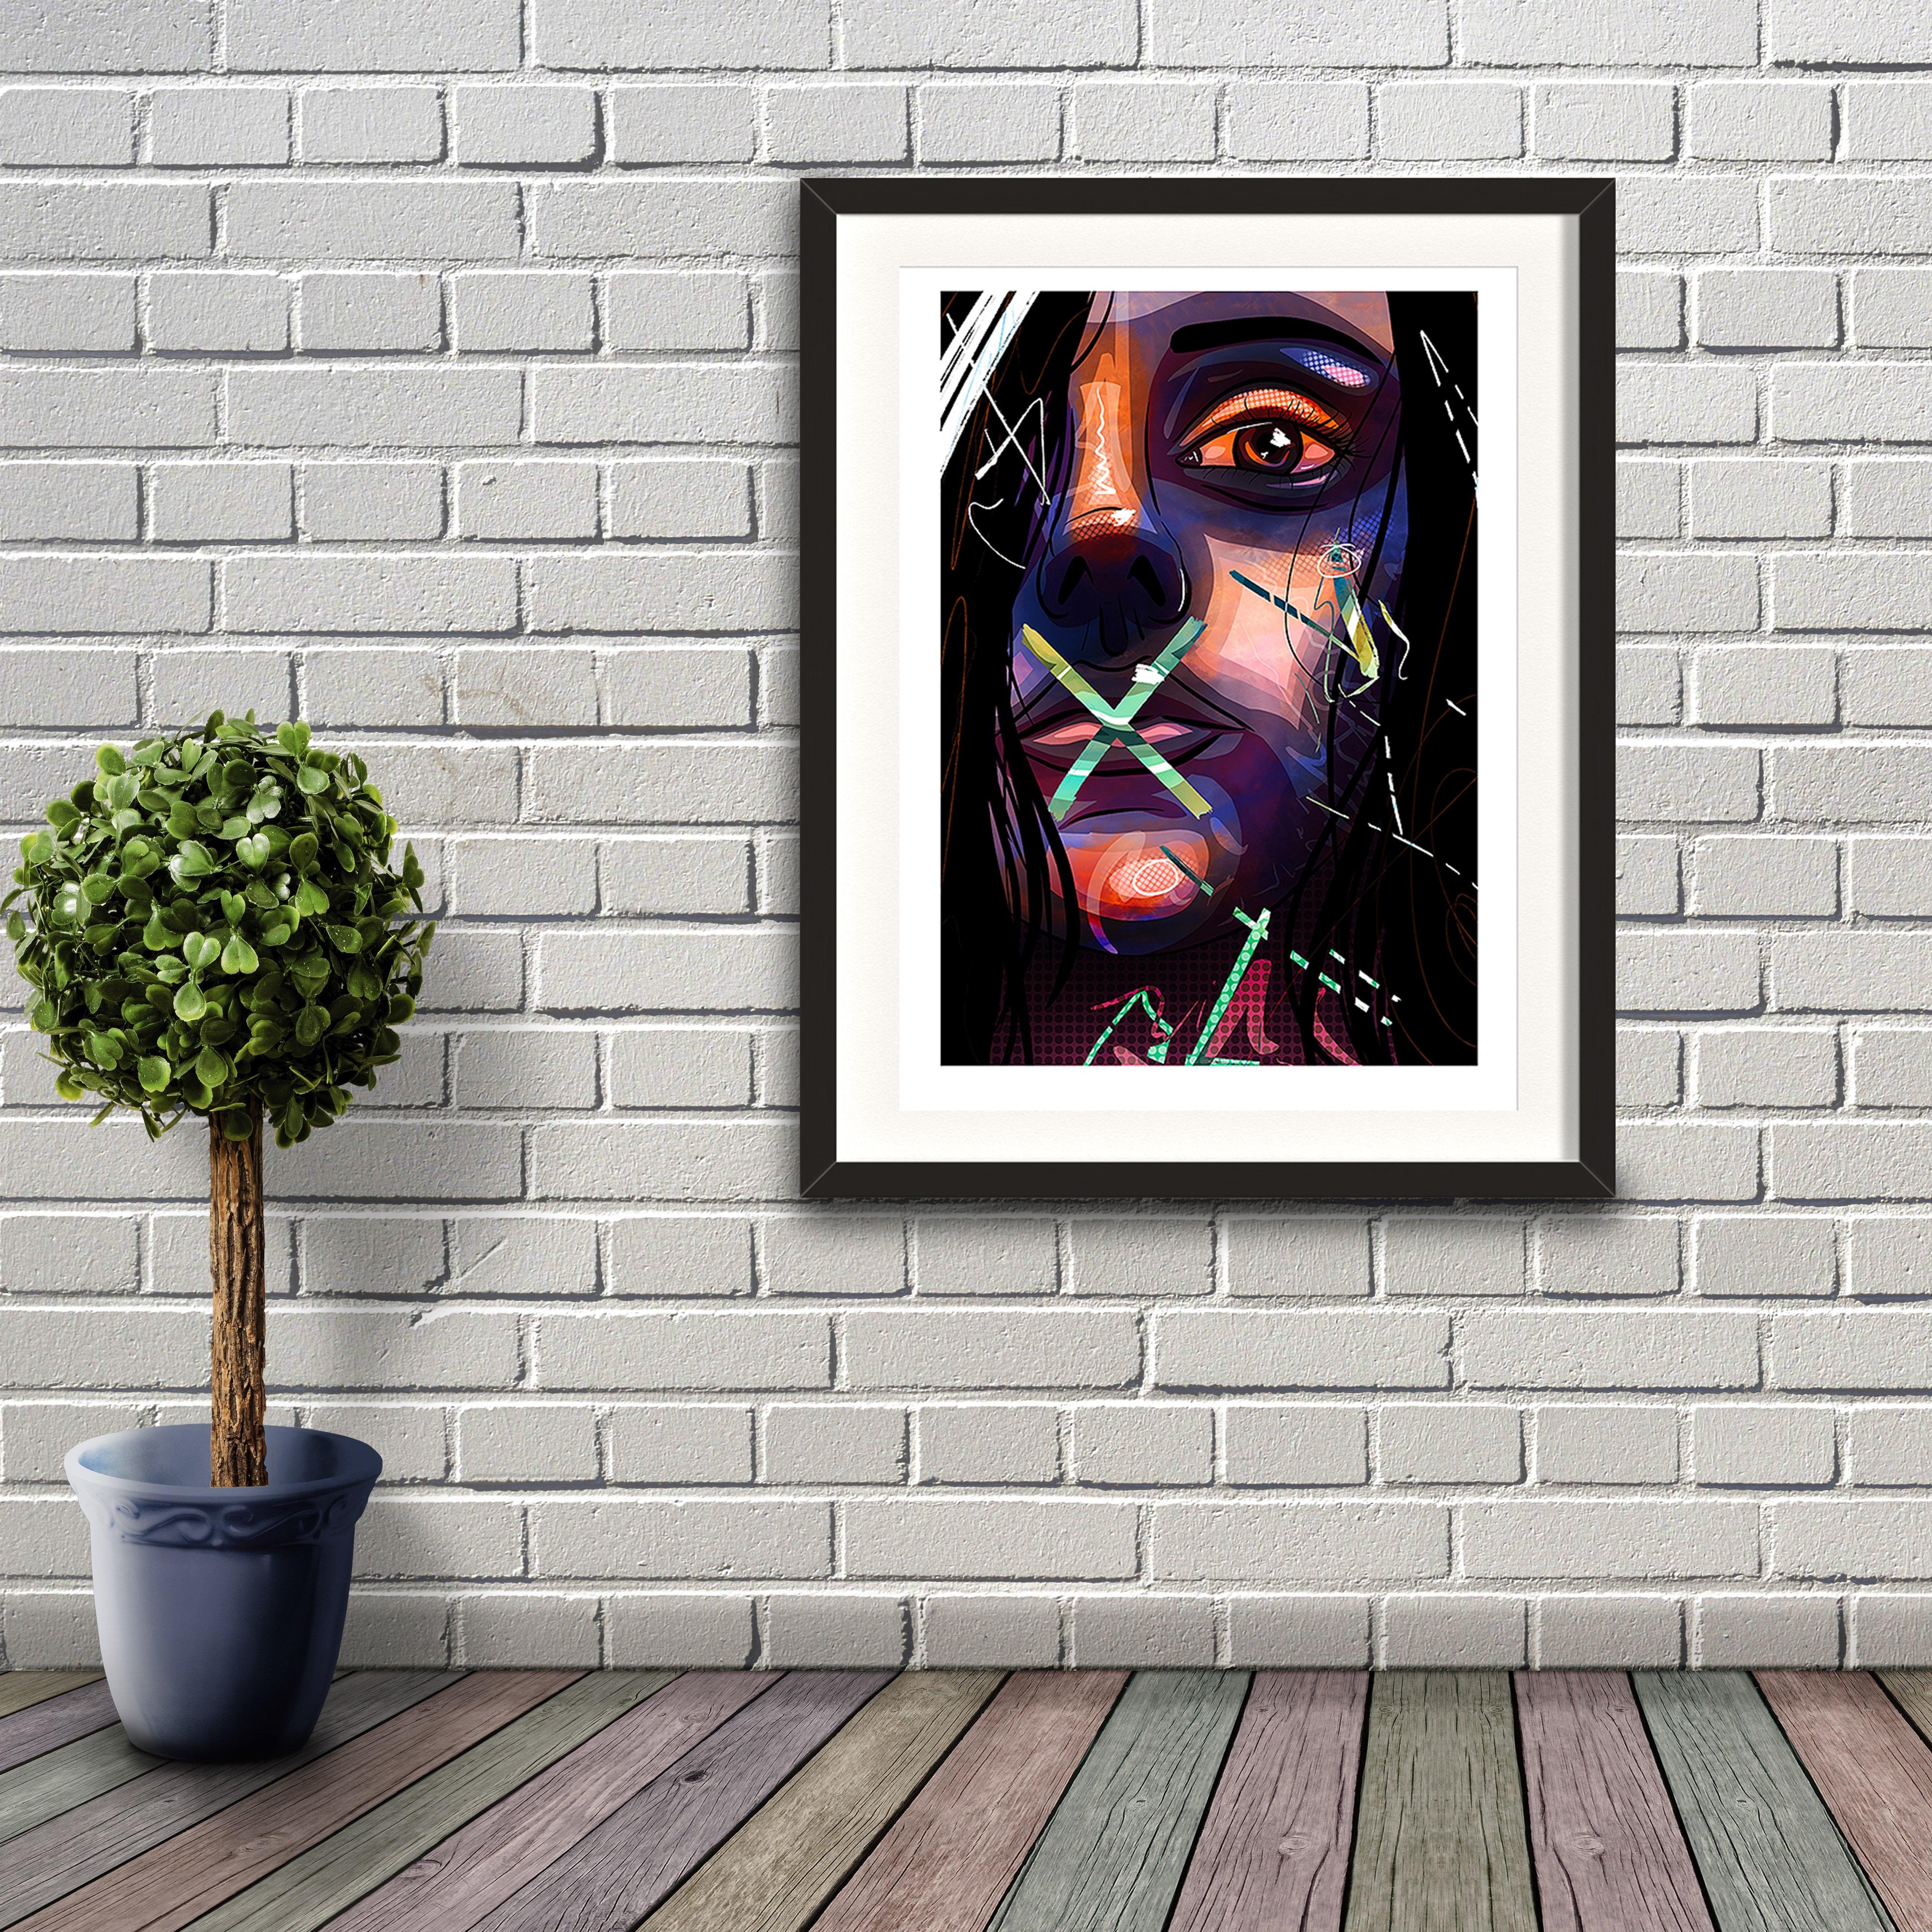 A digital pop art painting by Lily Bourne printed on eco fine art paper titled Hush Hushed showing a close up of a female face with abstract line and a green cross on here lips and mouth. Artwork shown in a black frame hanging on a brick wall.